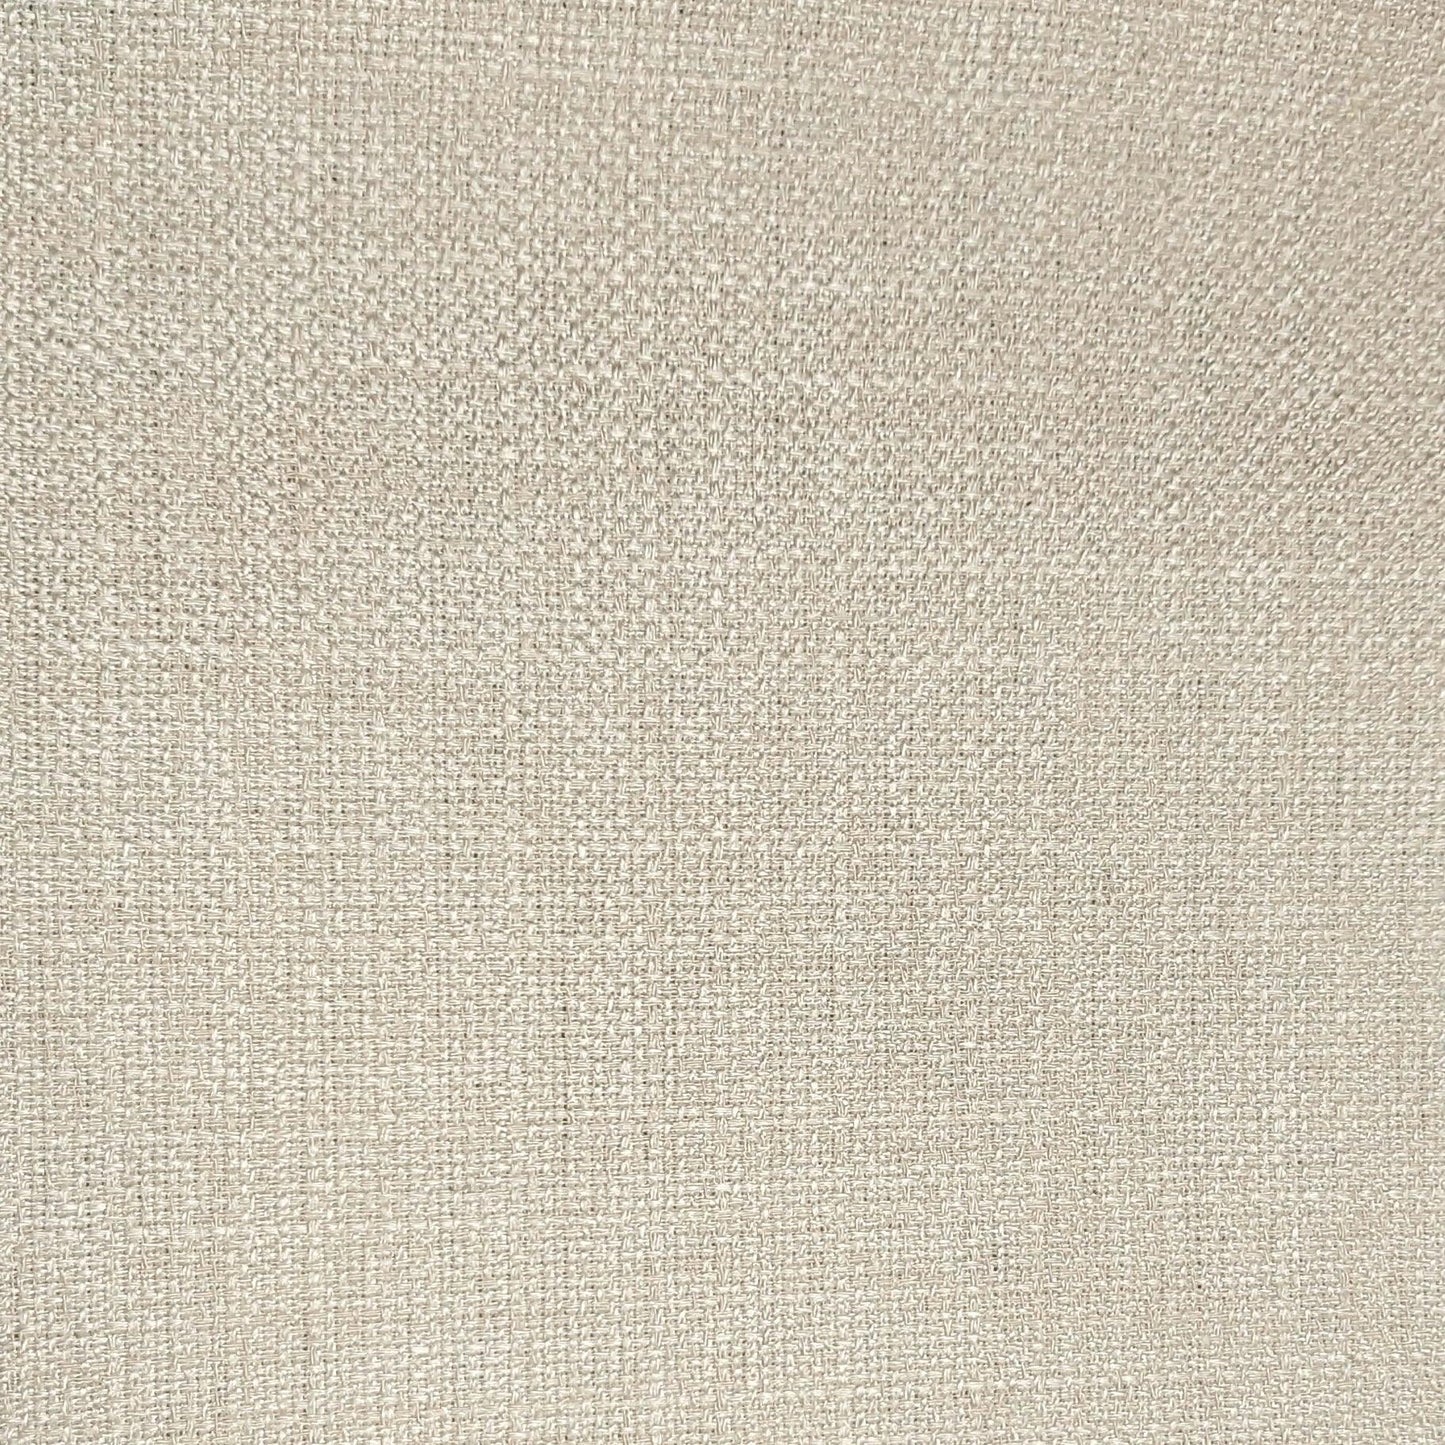 Upholstery Fabric Eco Stain Treated Cypress Sand